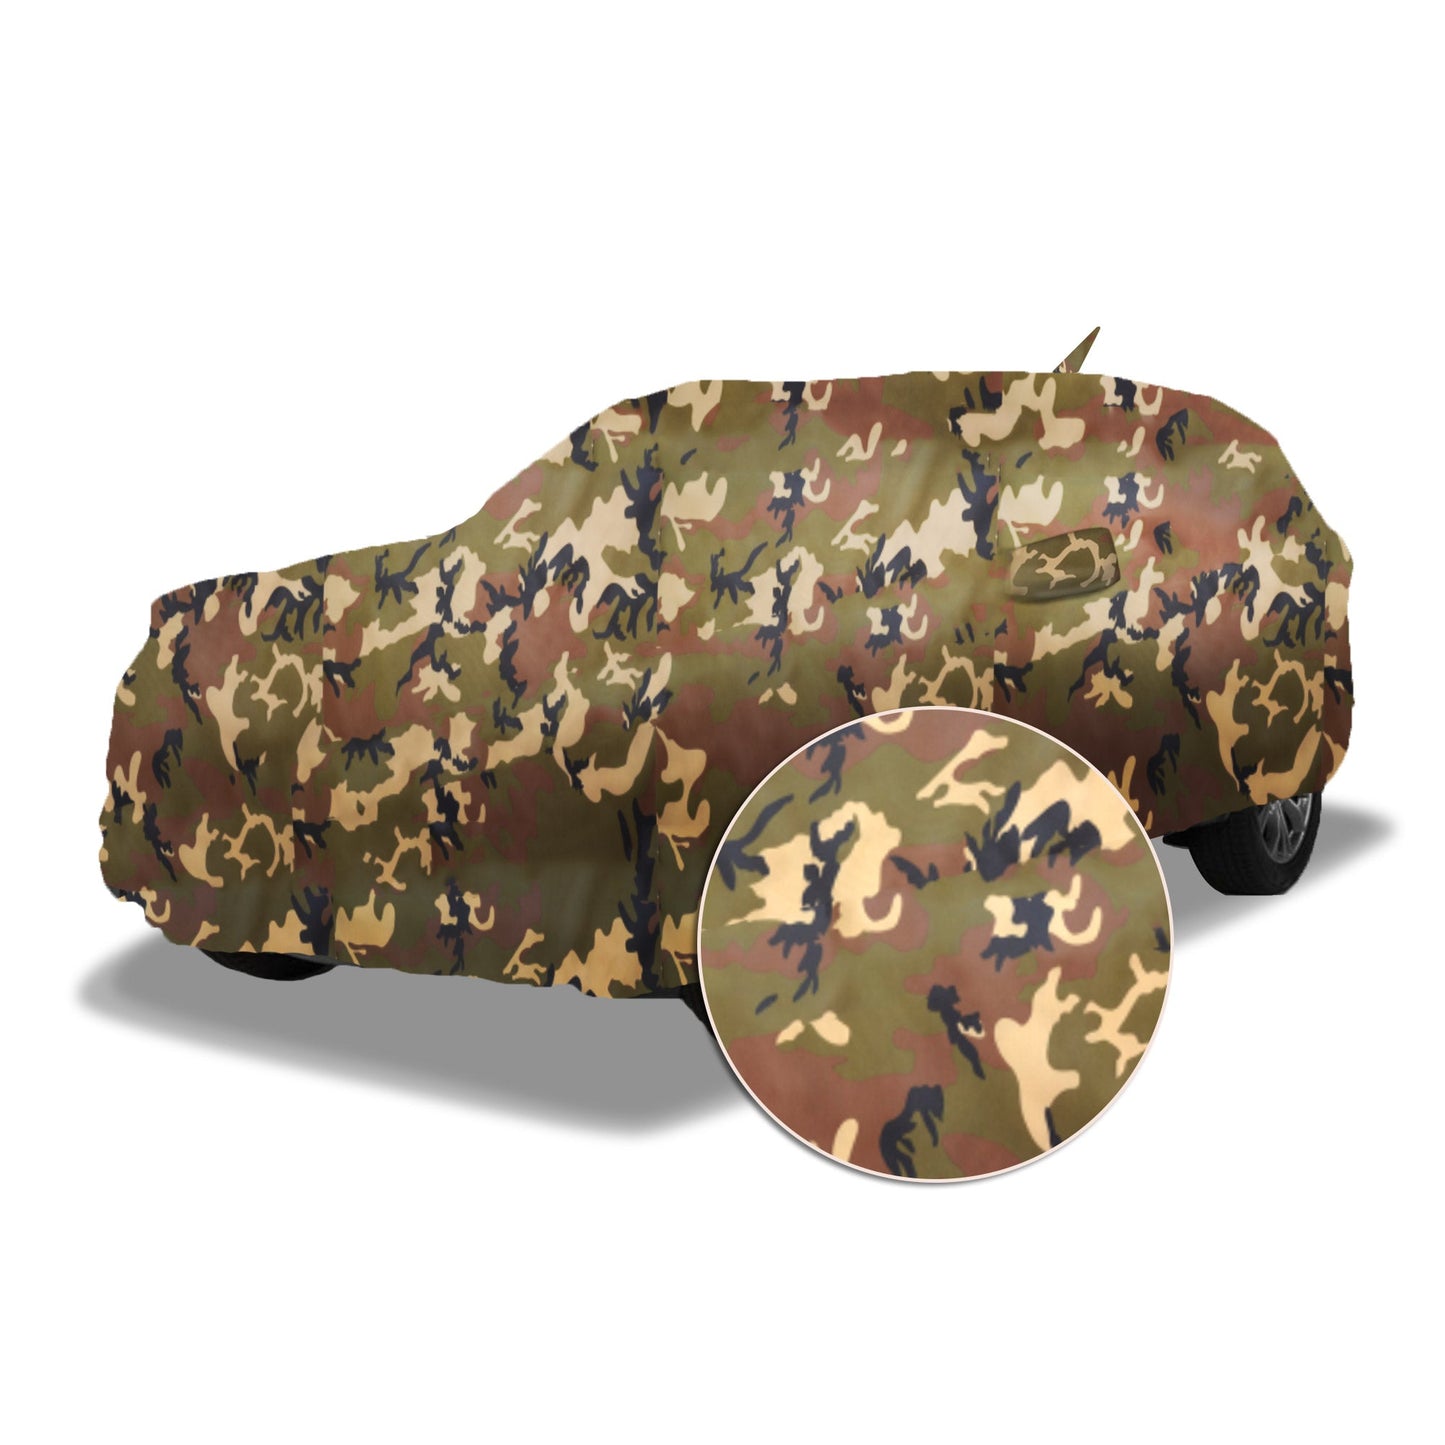 Ascot Hyundai Creta Car Body Cover 2015-2020 Model Extra Strong & Dust Proof Jungle Military Car Cover with UV Proof & Water-Resistant Coating